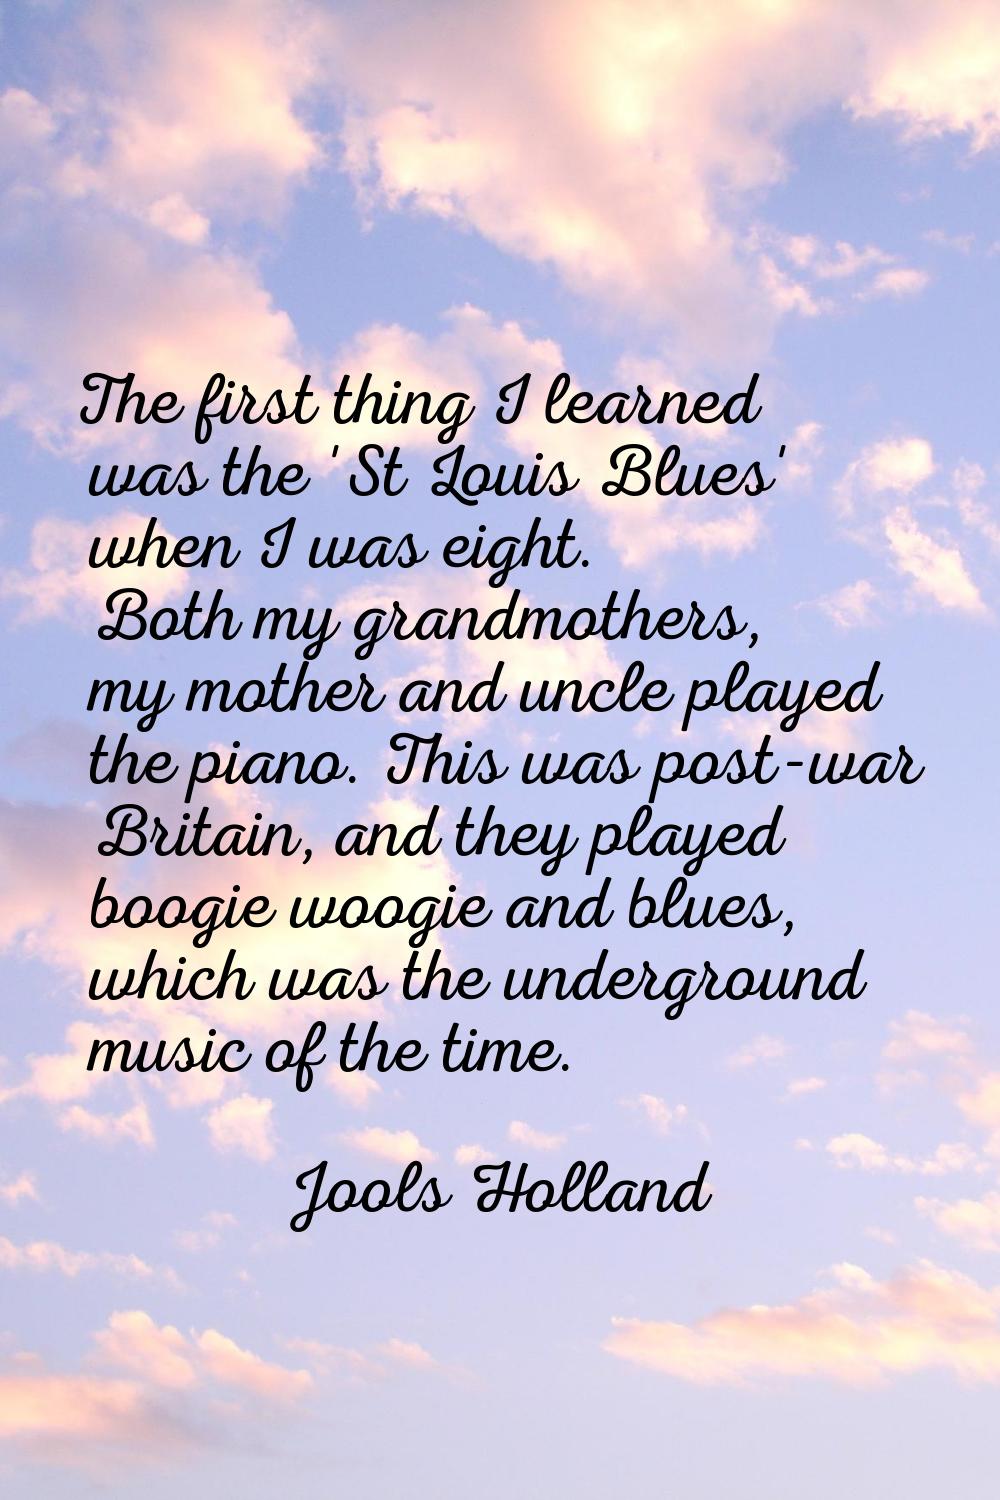 The first thing I learned was the 'St Louis Blues' when I was eight. Both my grandmothers, my mothe